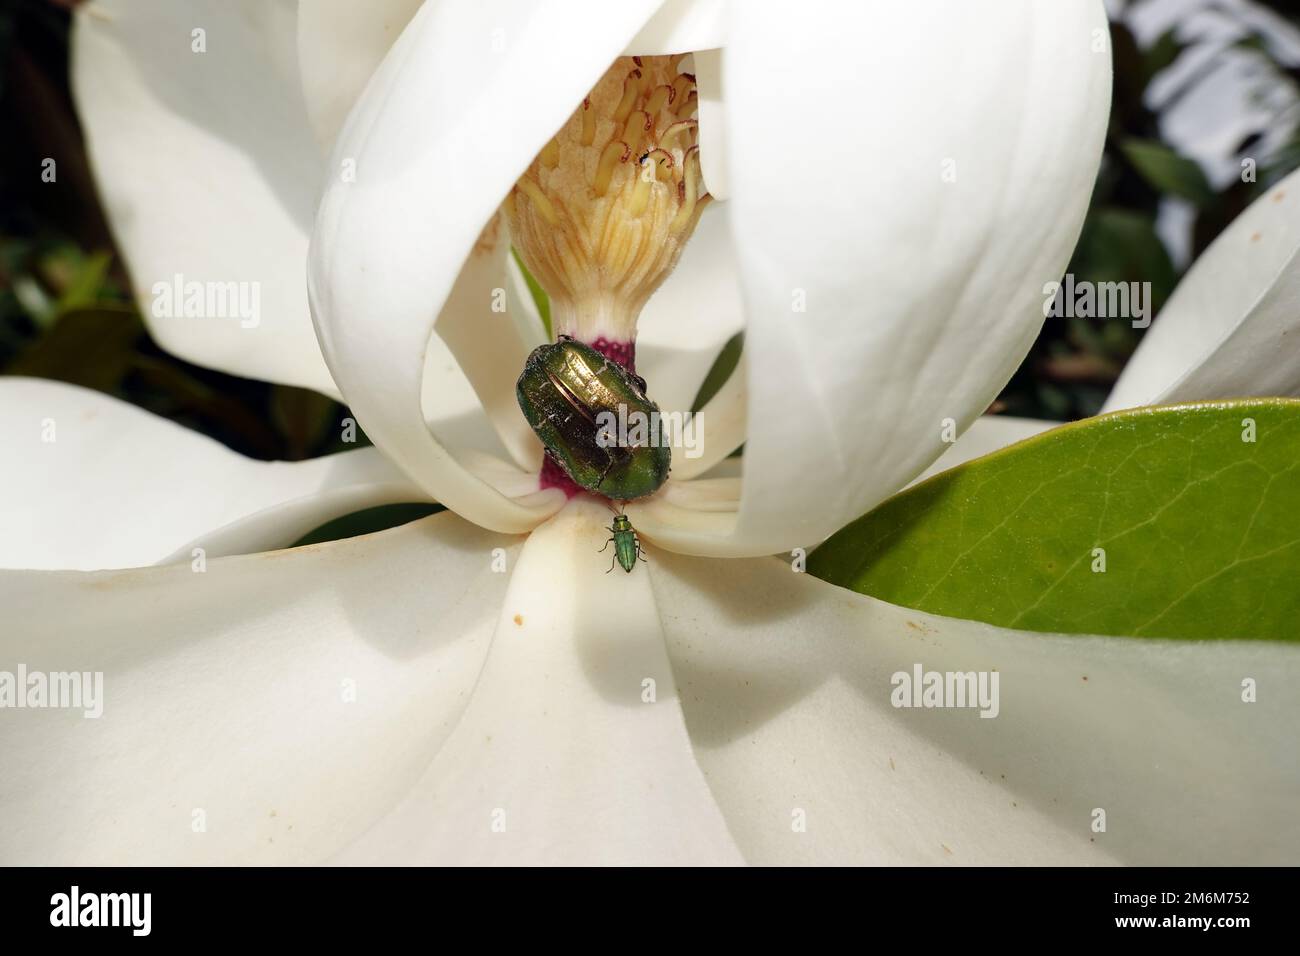 Rose beetle and shiny flower splendor beetle on the flower of an evergreen magnolia Stock Photo